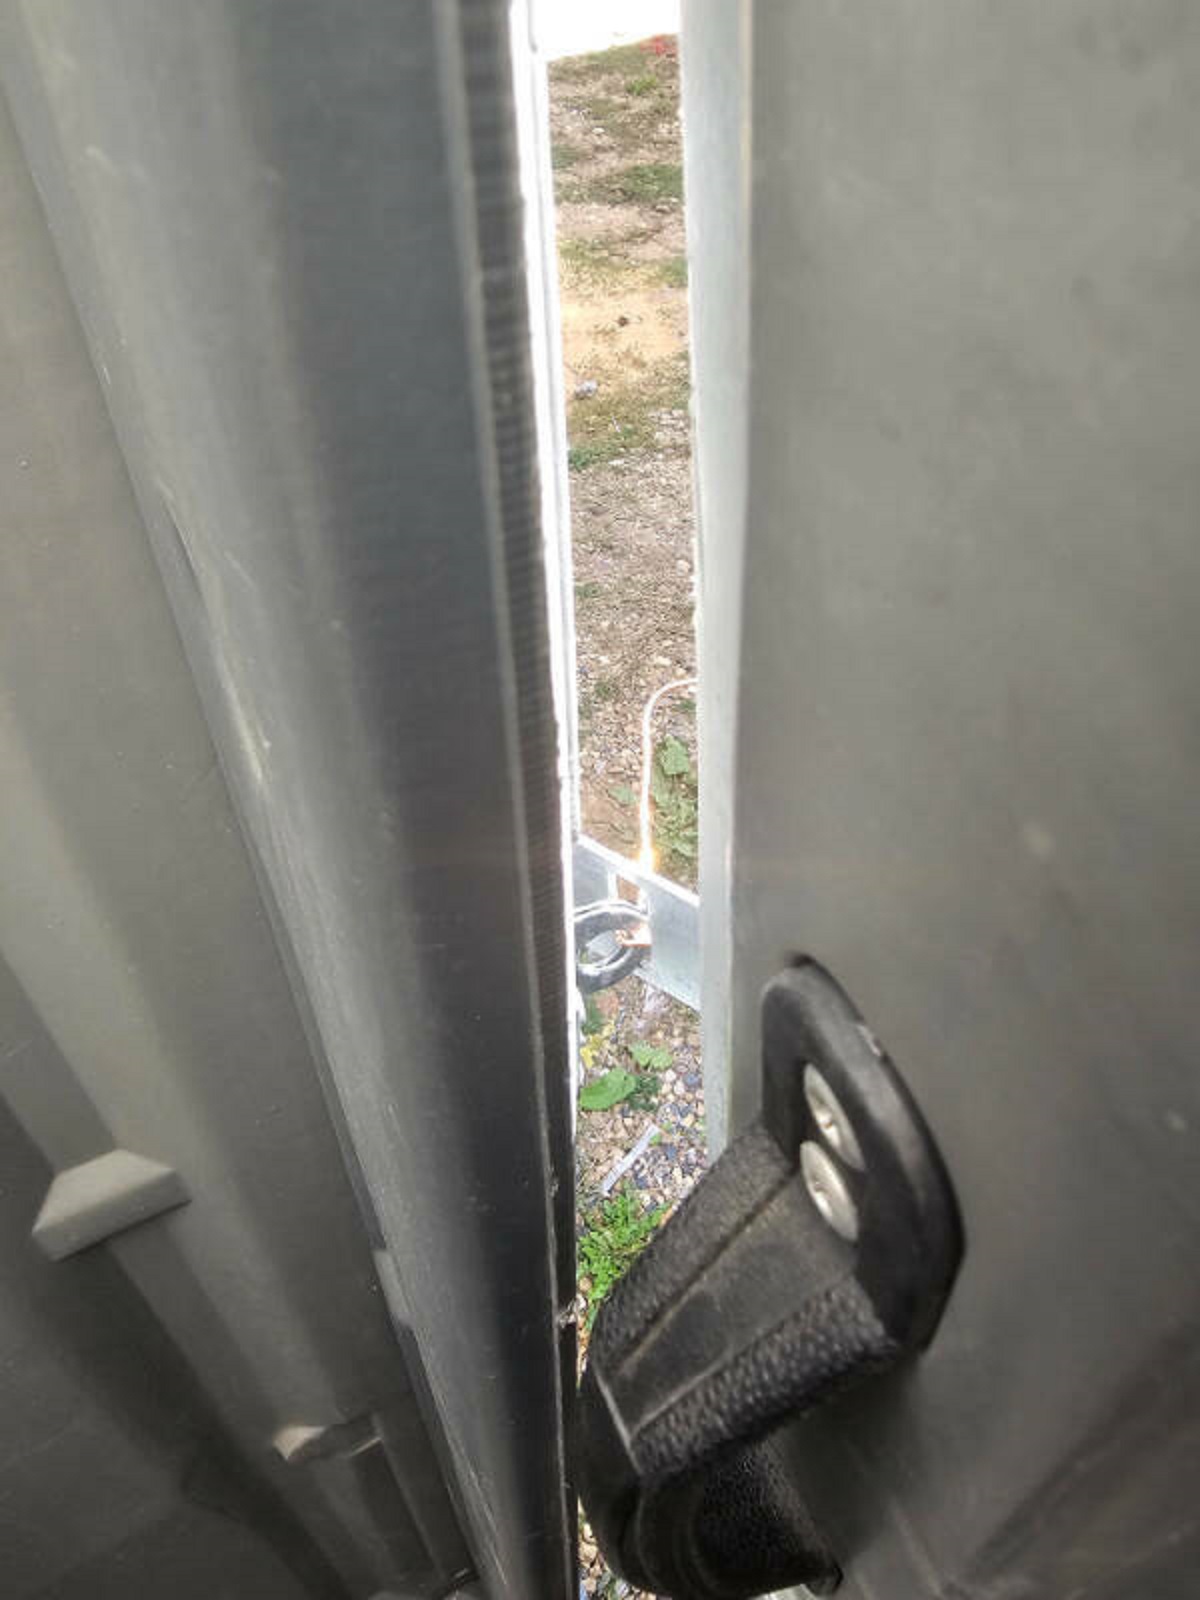 “My coworker “locked” me in the Porta Potty and then went to lunch”